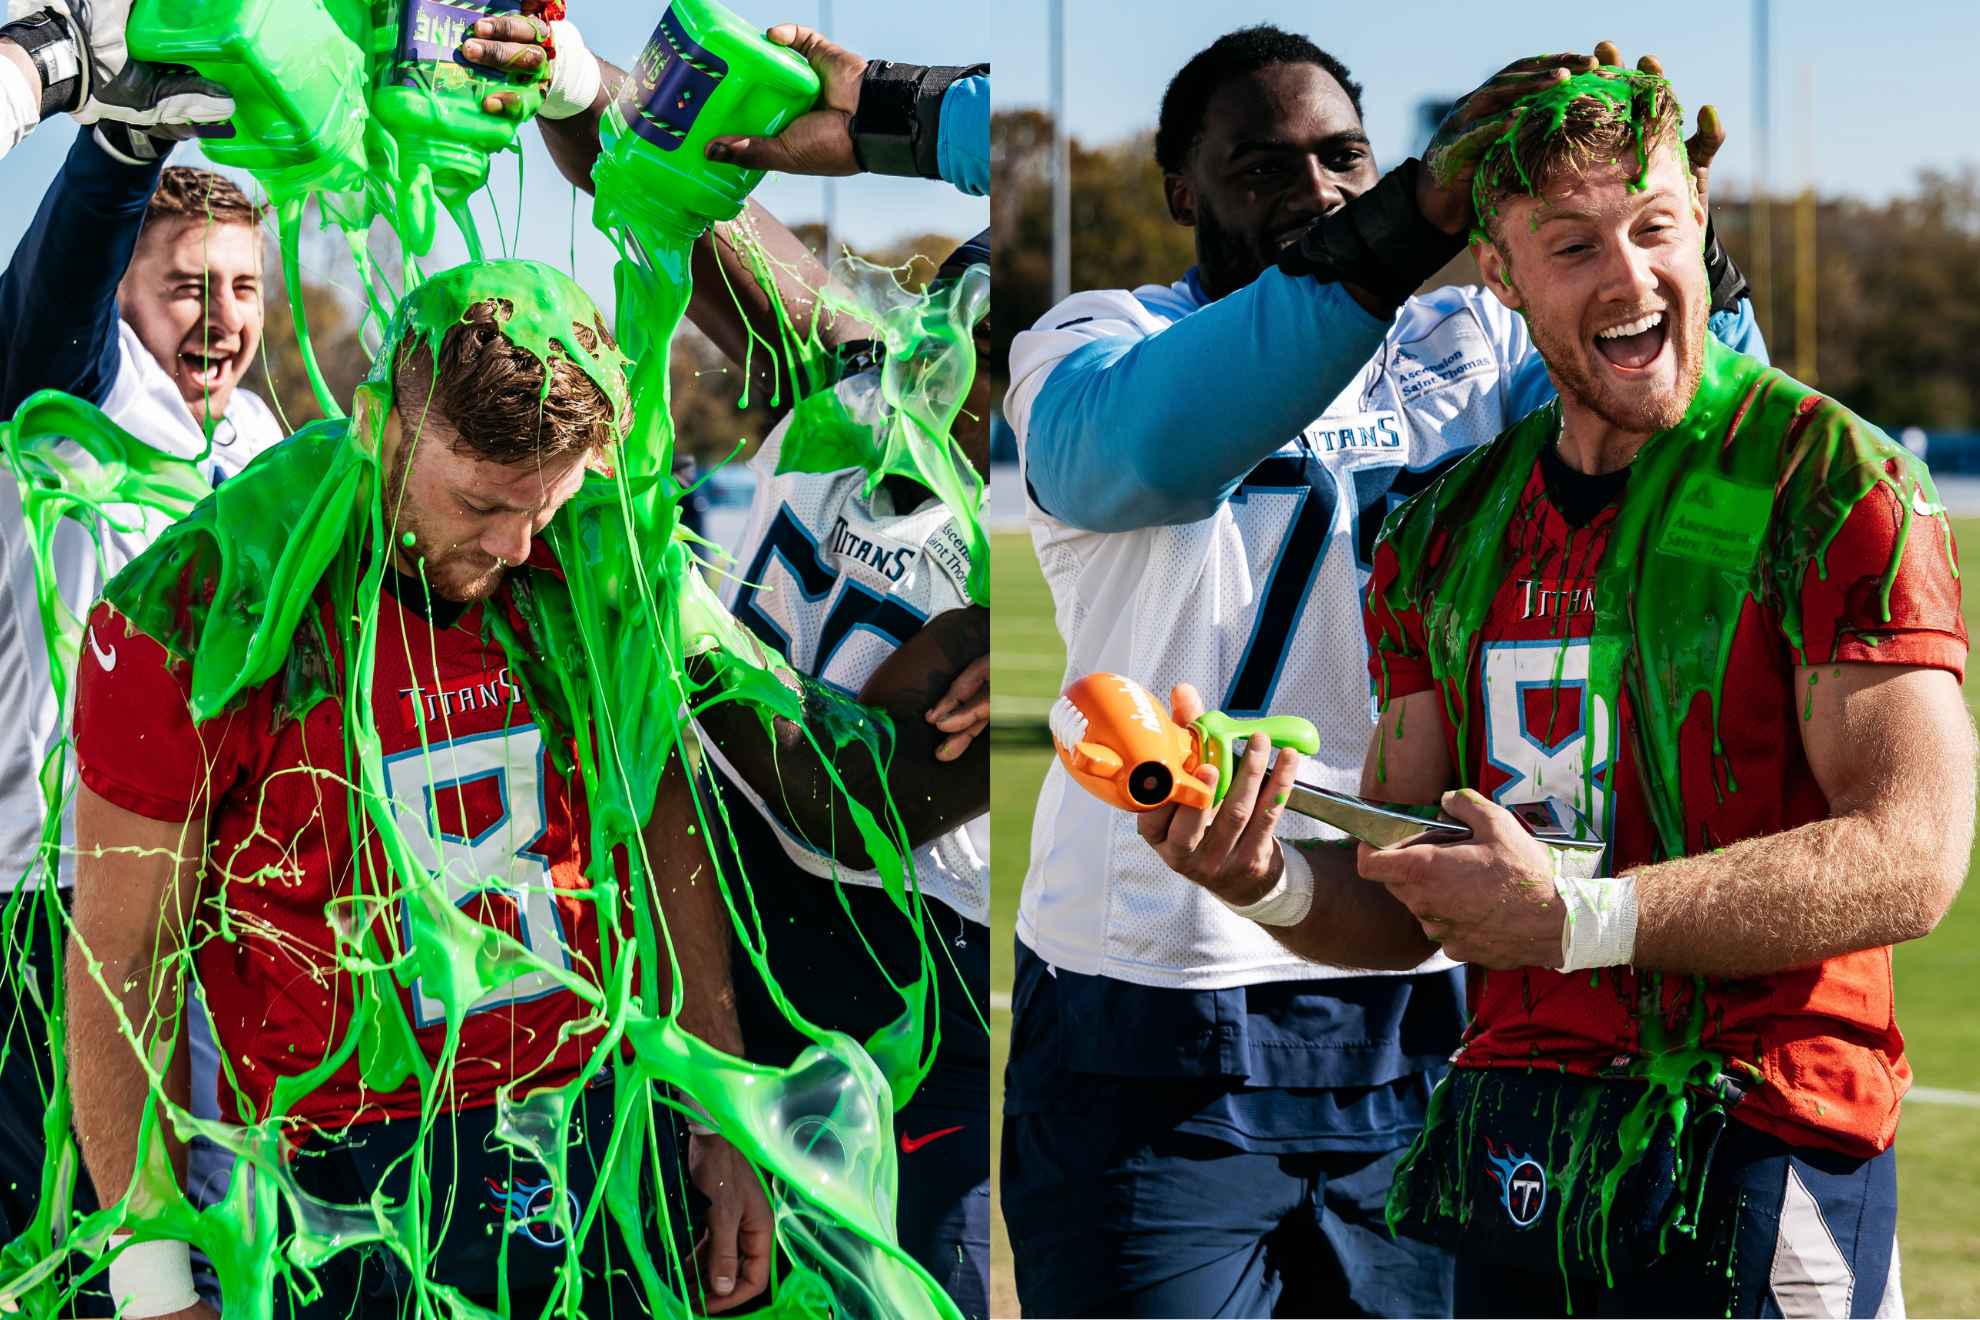 Will Levis Wednesday: NVP Award and slimed by teammates.